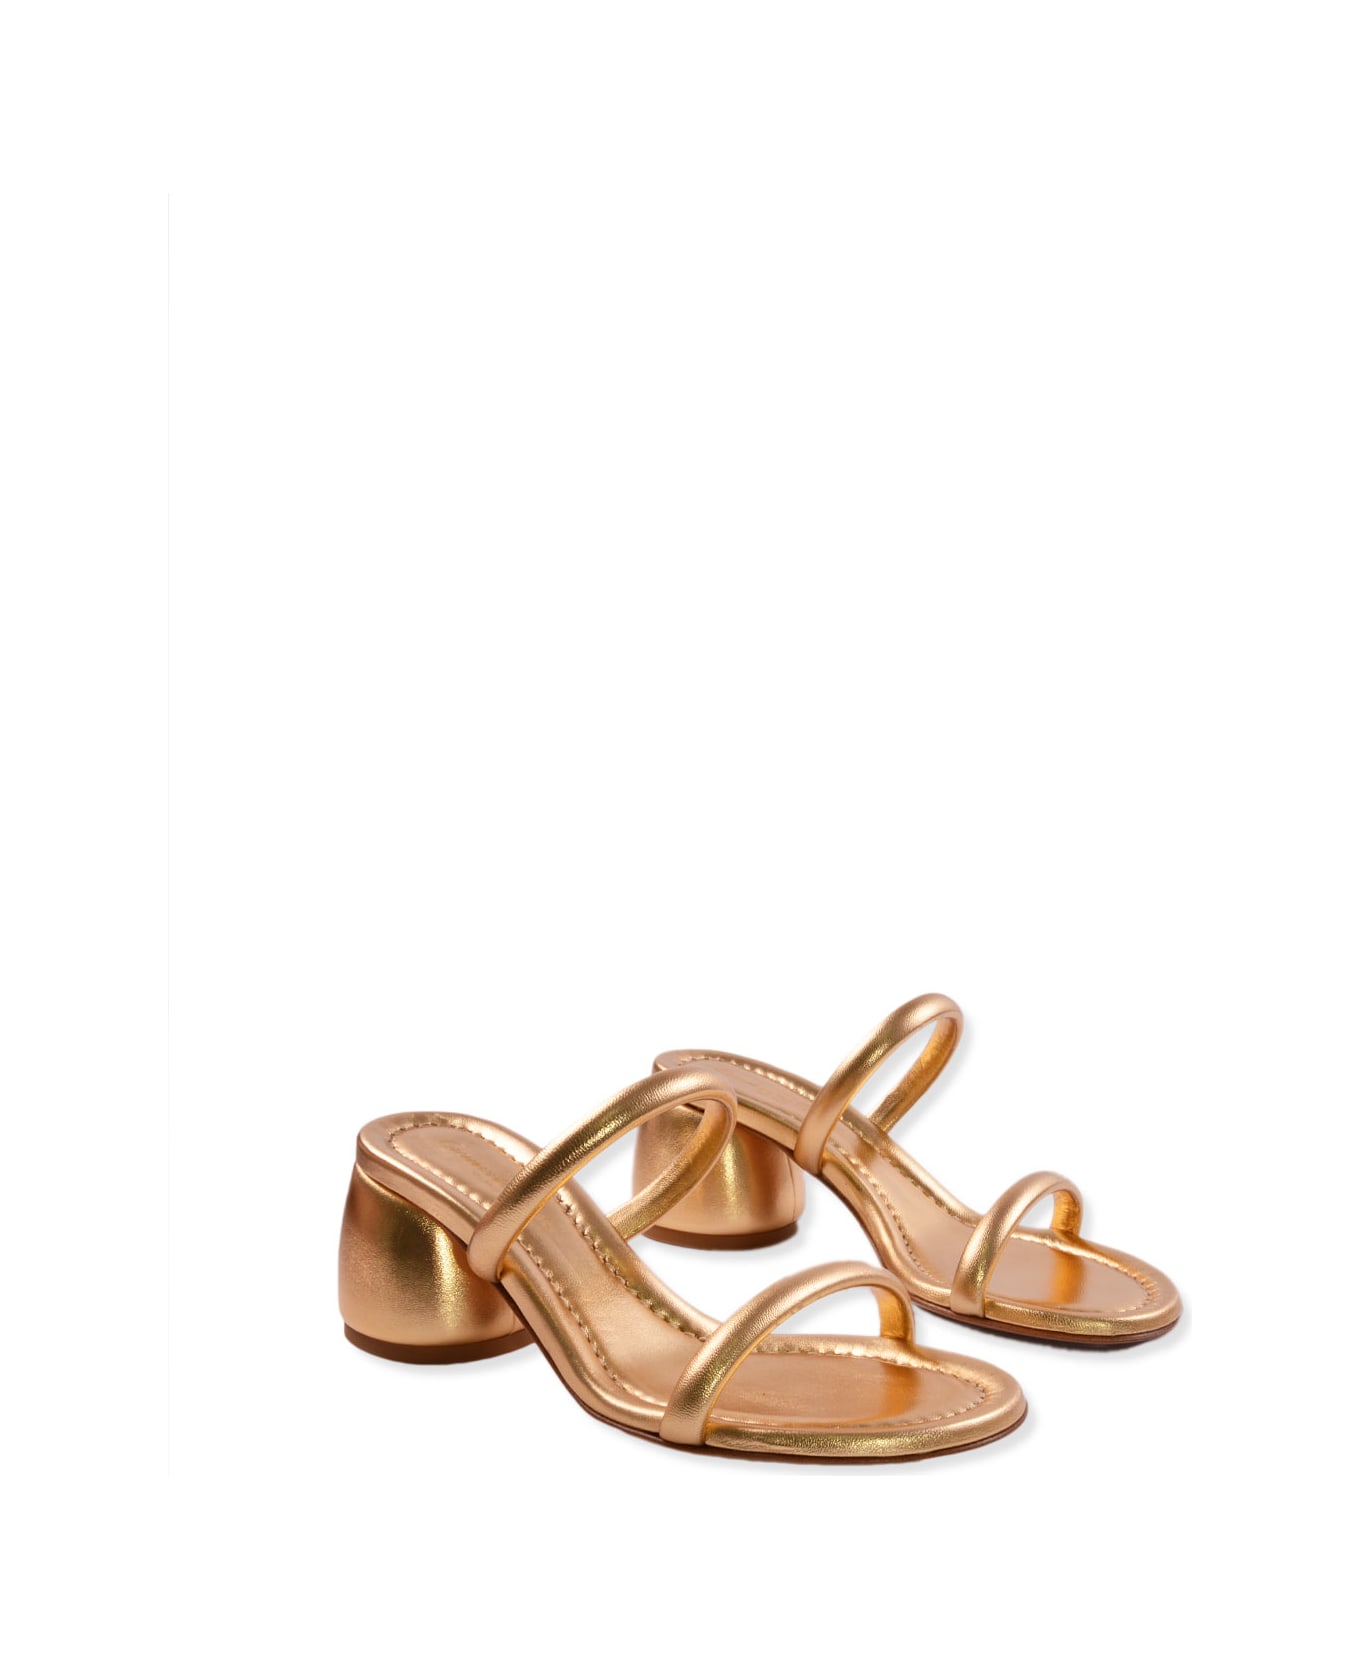 Gianvito Rossi Sandal With Heel - Gold